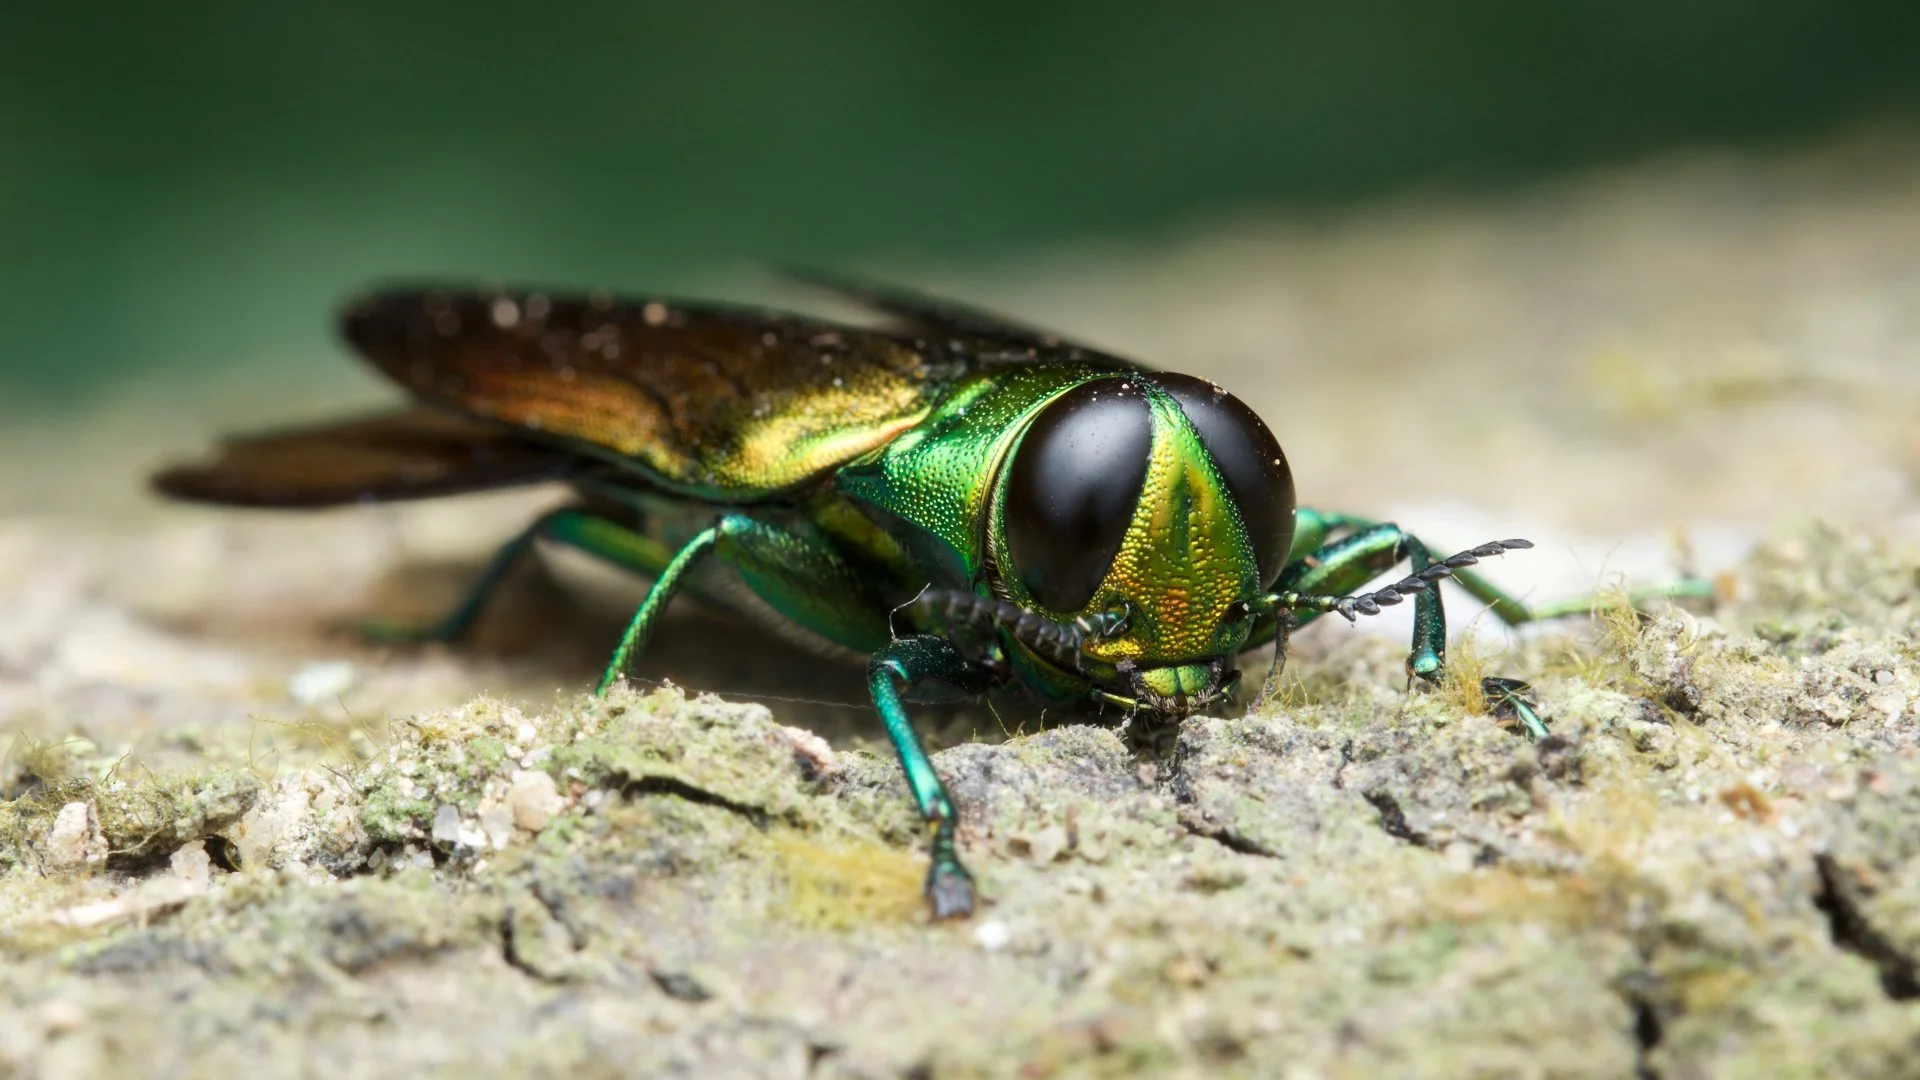 What Are Emerald Ash Borers & How Do You Protect Your Trees From Them?